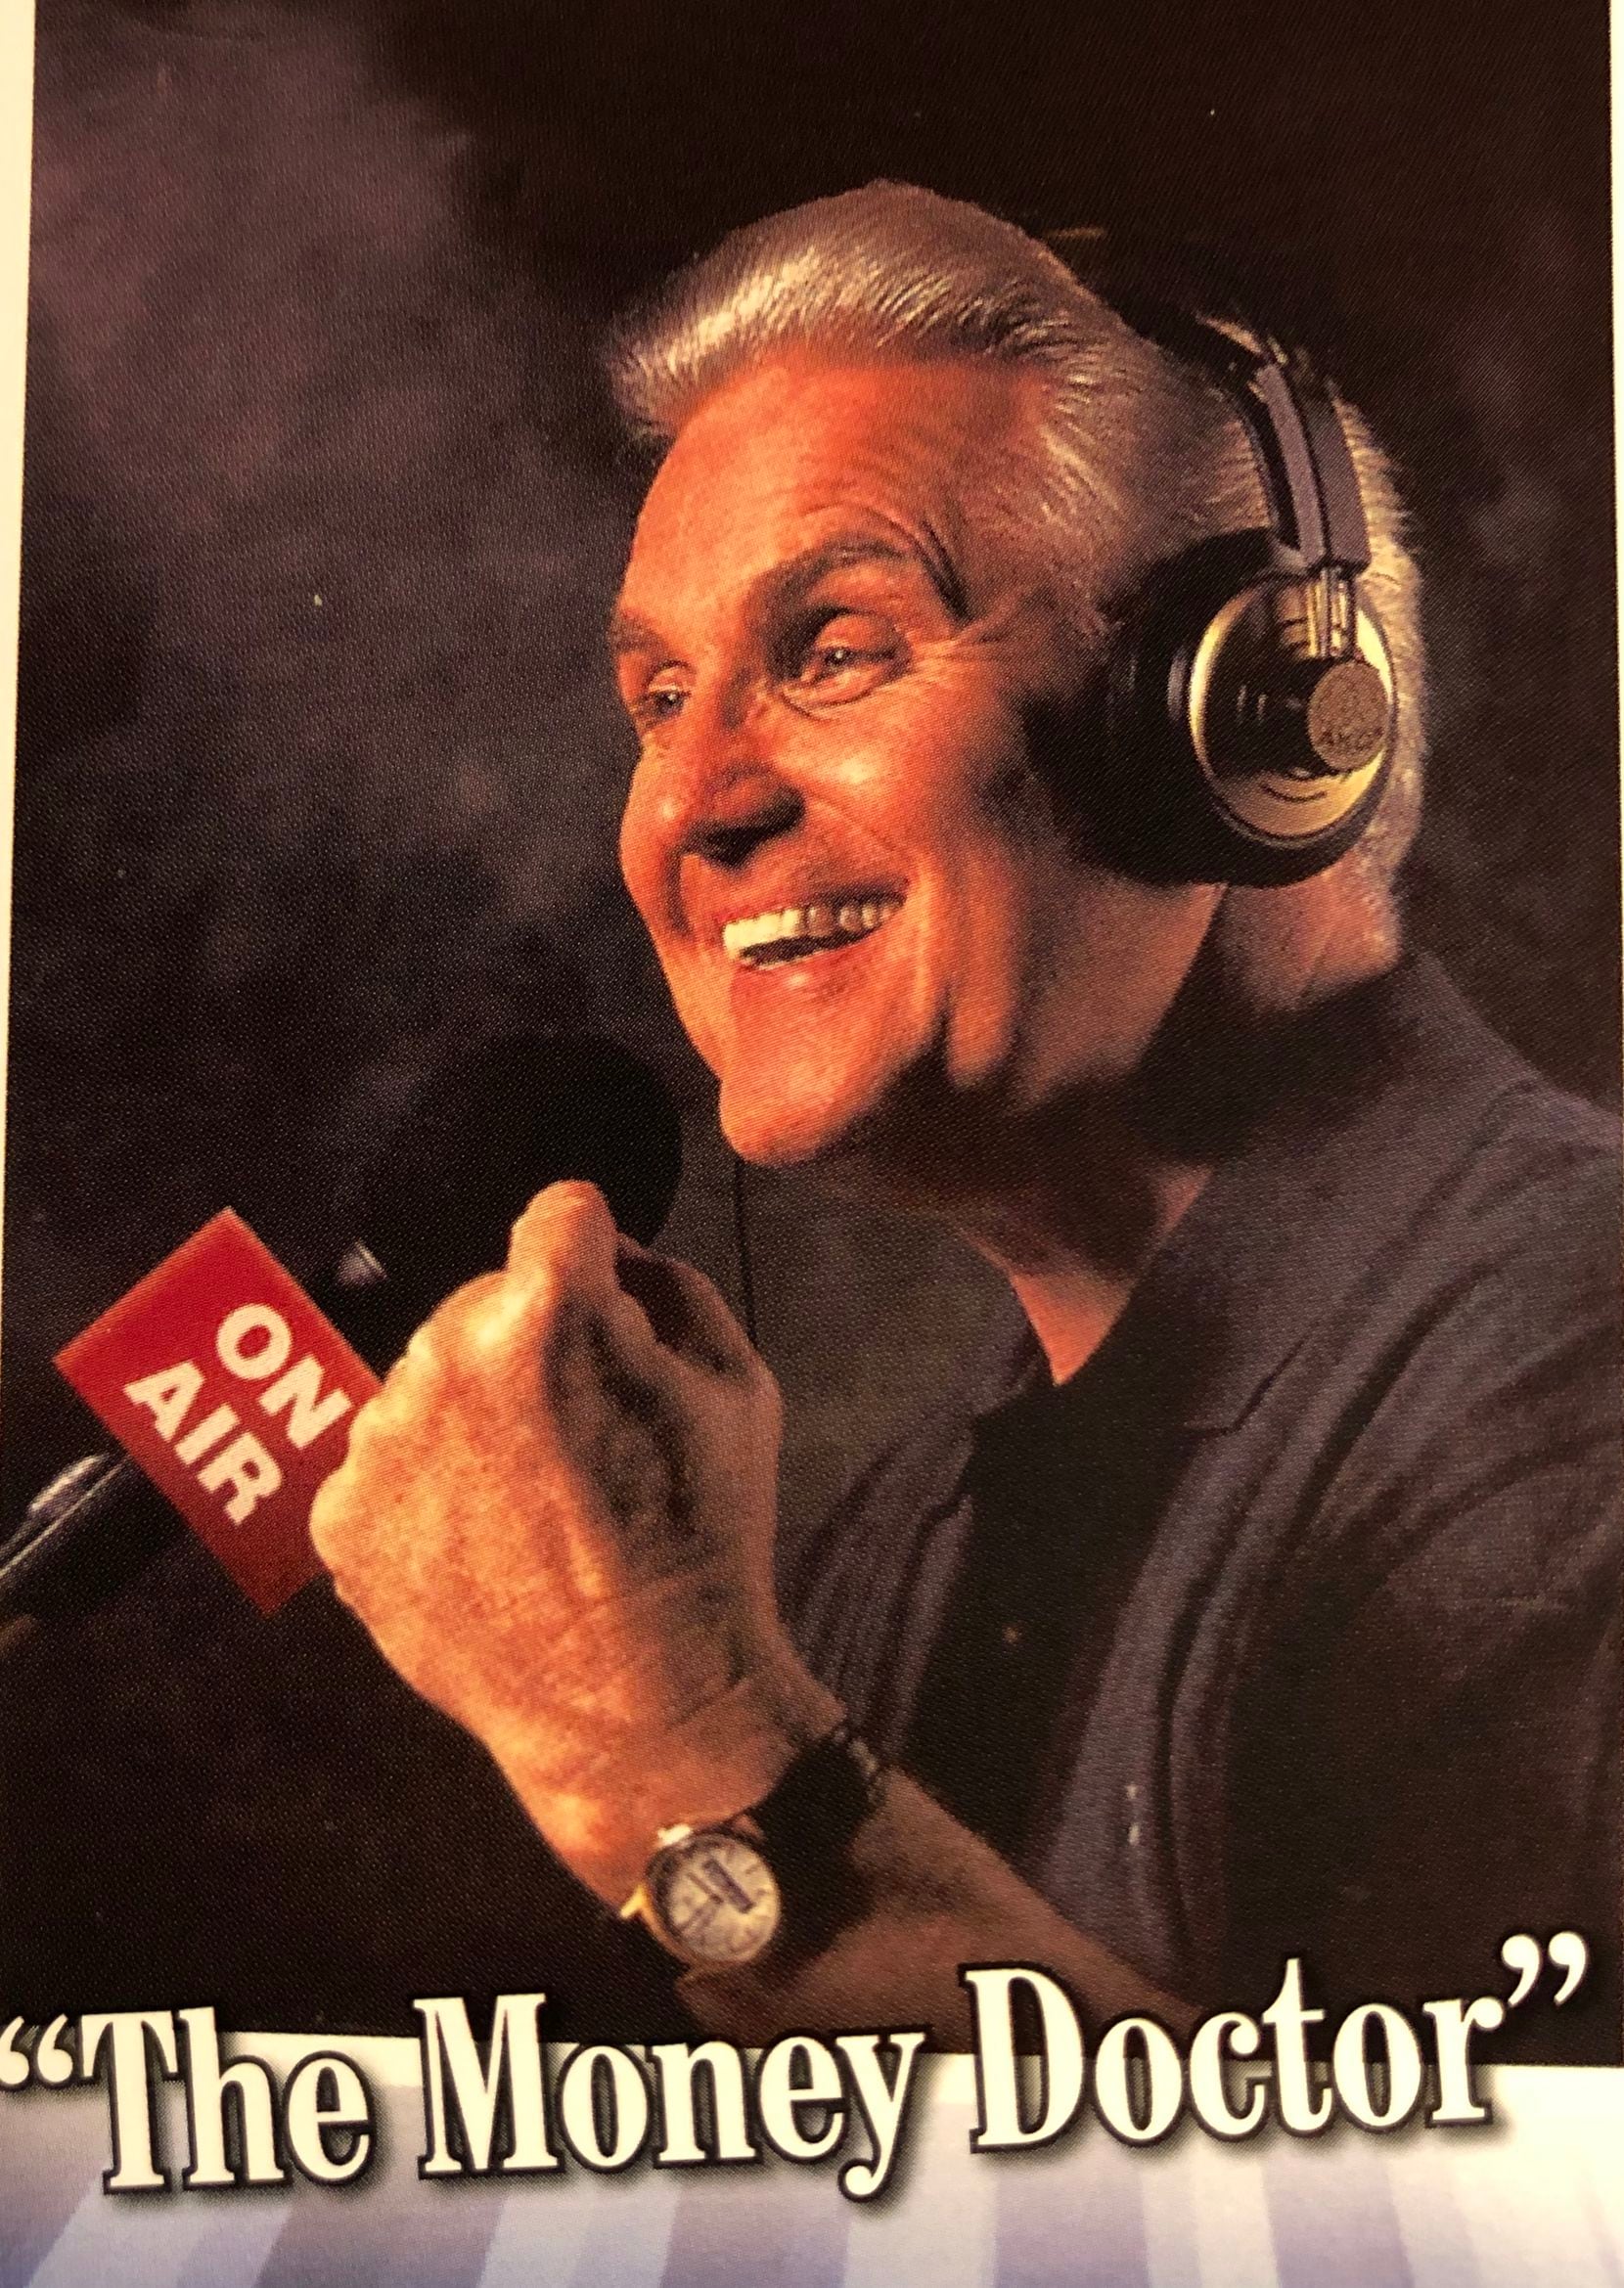 Doc Gallagher in one of his publicity photos, photographed from a flier handed to The Dallas Morning News Watchdog at a 2016 seminar in Hurst.